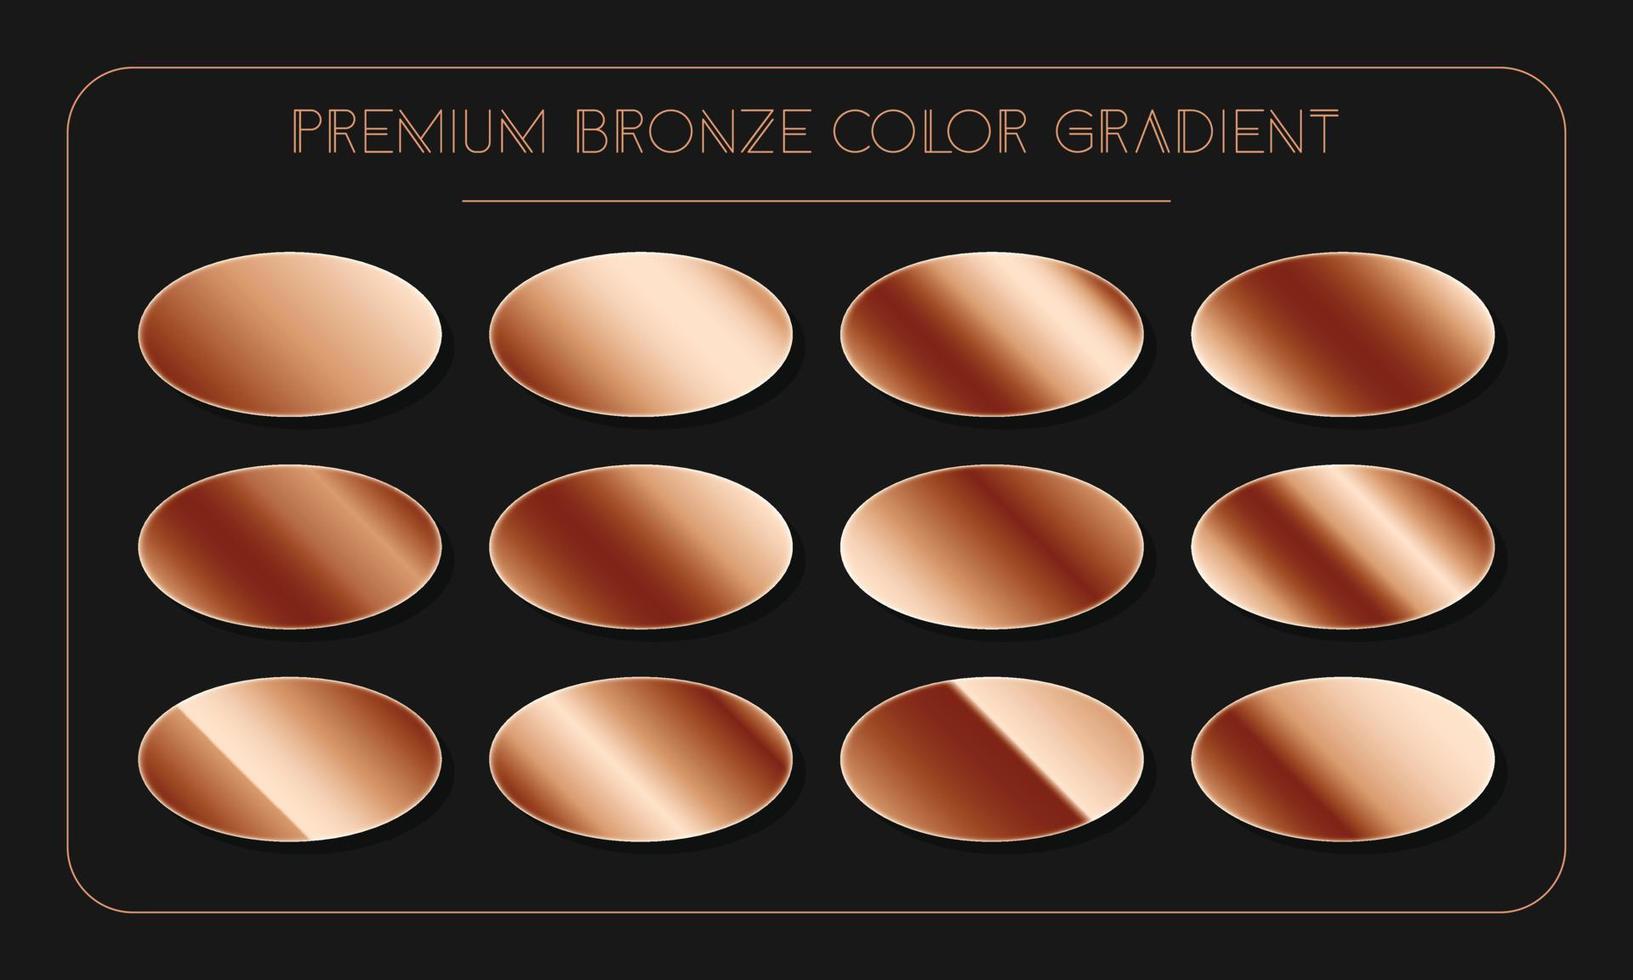 Luxury bronze gradient colour palette catalog samples in RGB or HEX pastel and neon vector